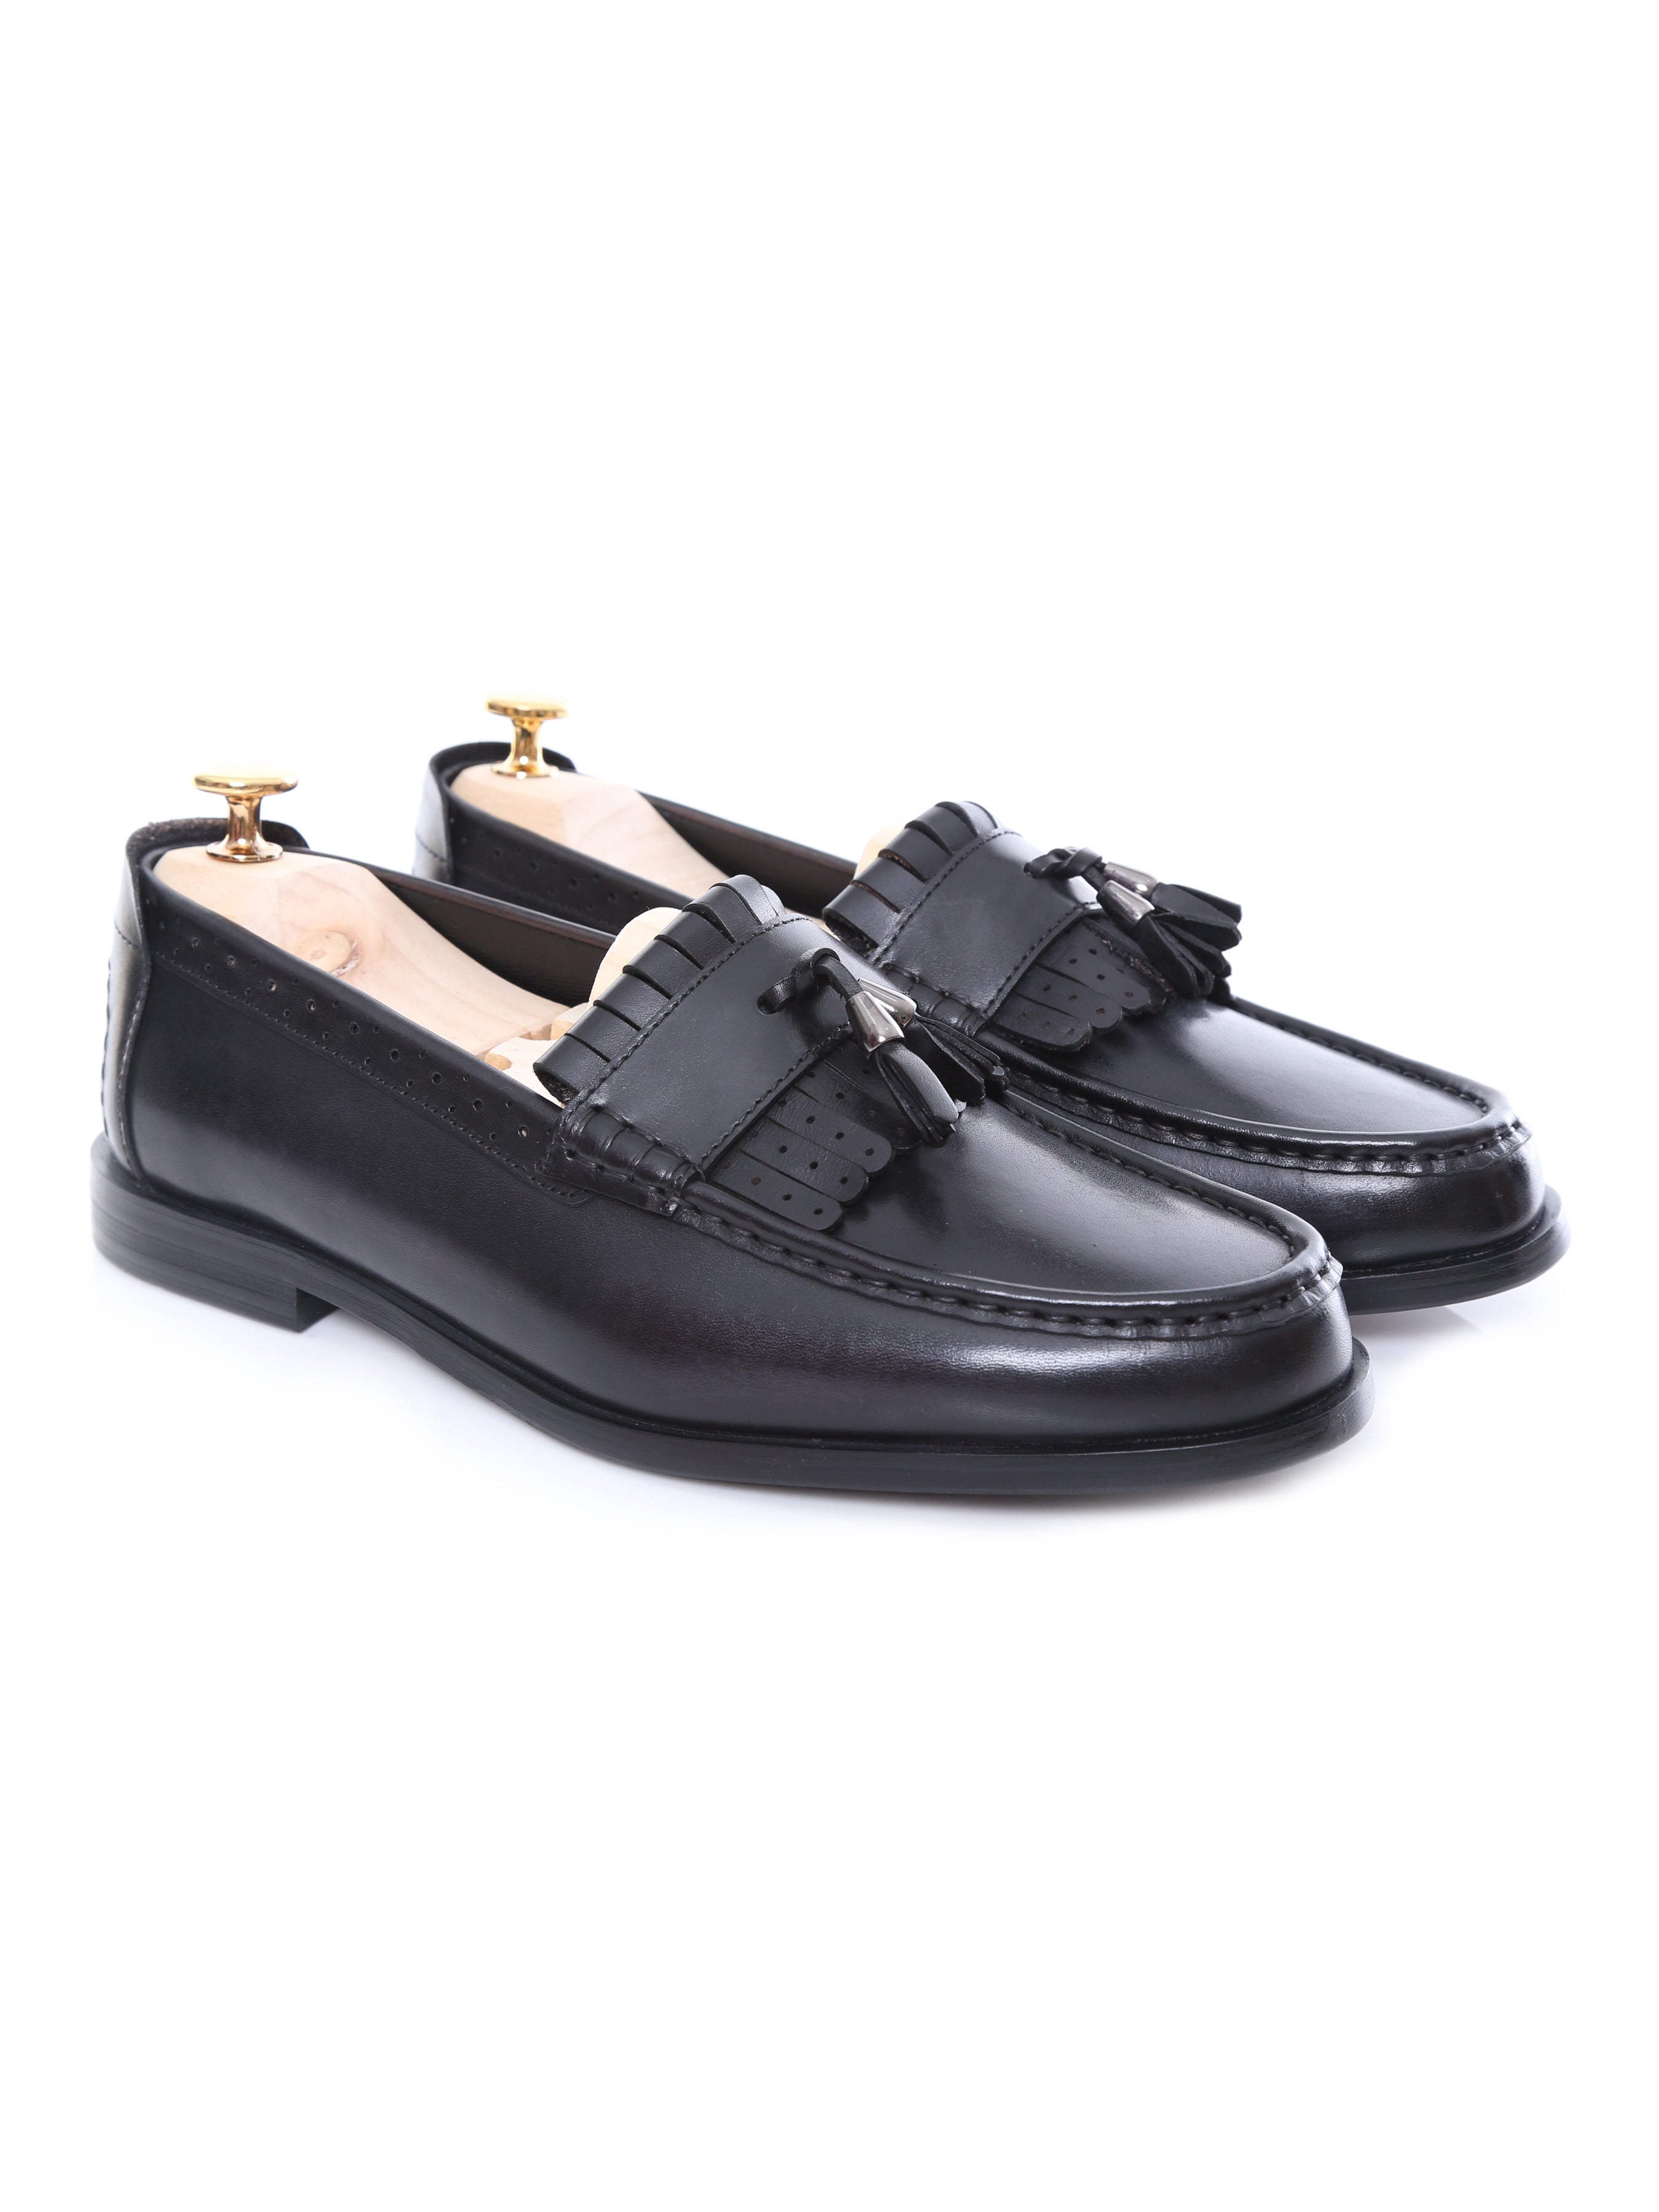 Fringe Classic Loafer - Black Grey with Tassel (Hand Painted Patina) - Zeve Shoes